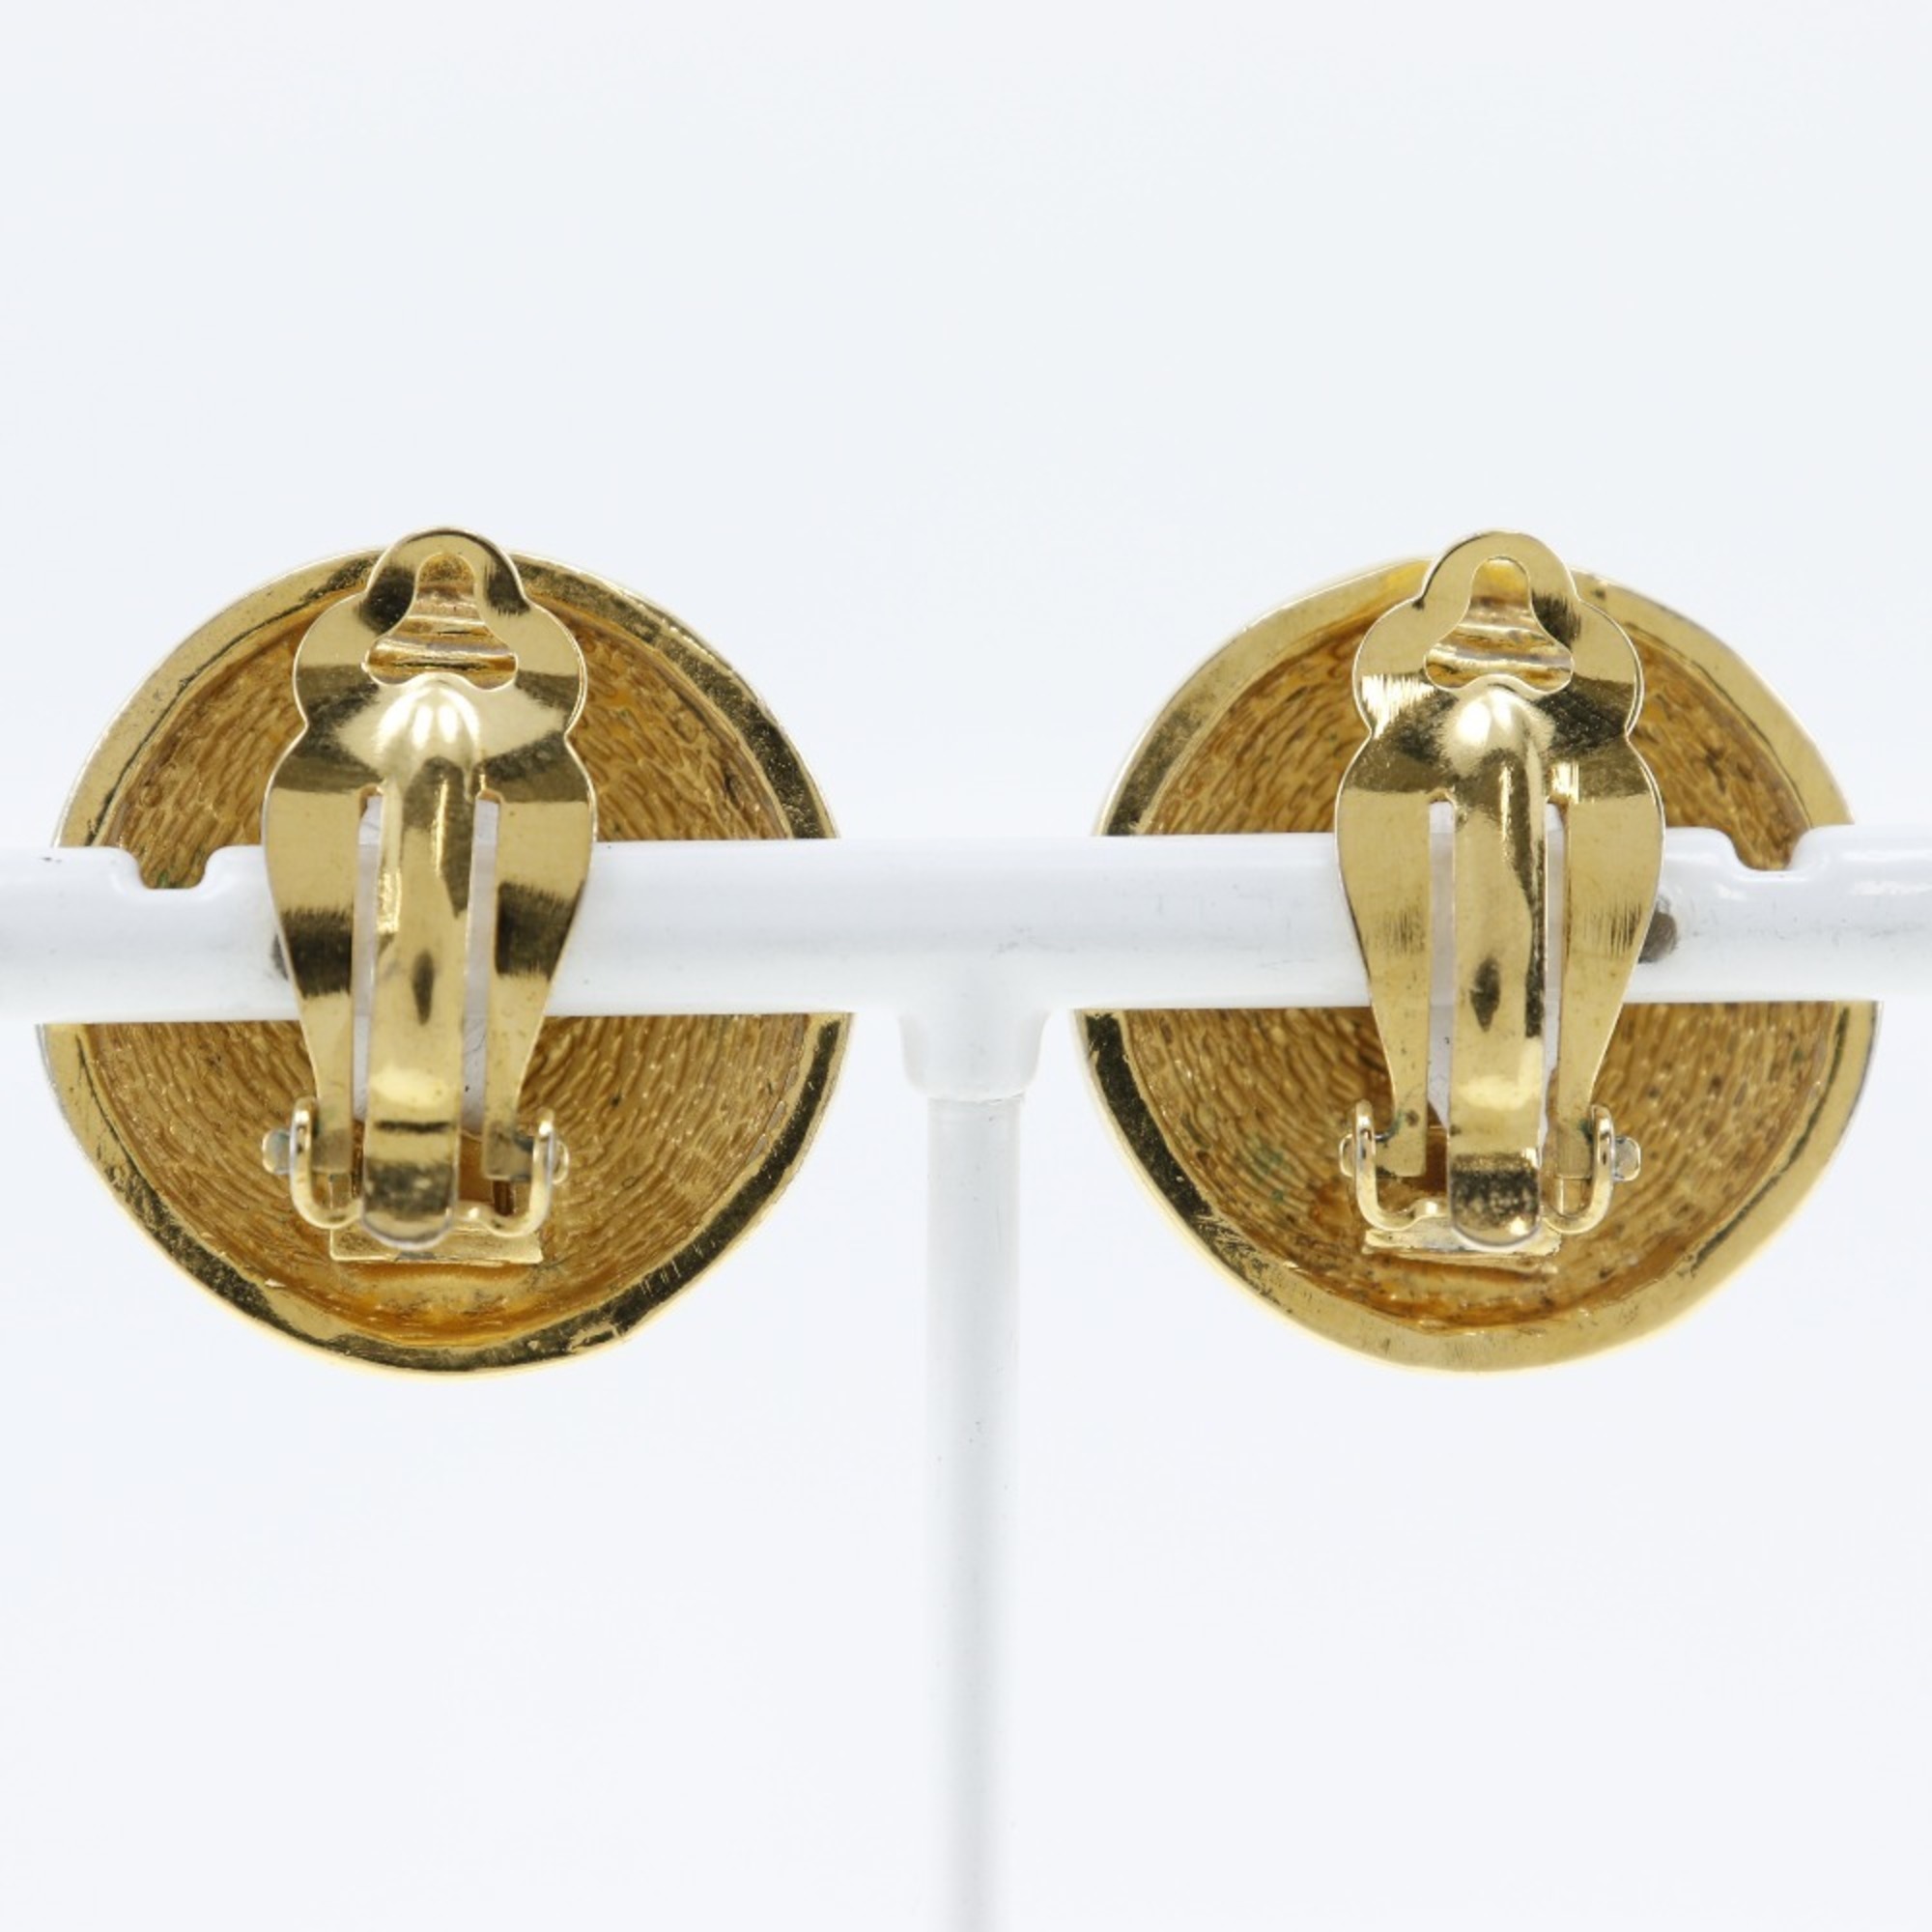 CHANEL COCO Mark Earrings Matelasse Vintage Gold Plated Made in France Ladies